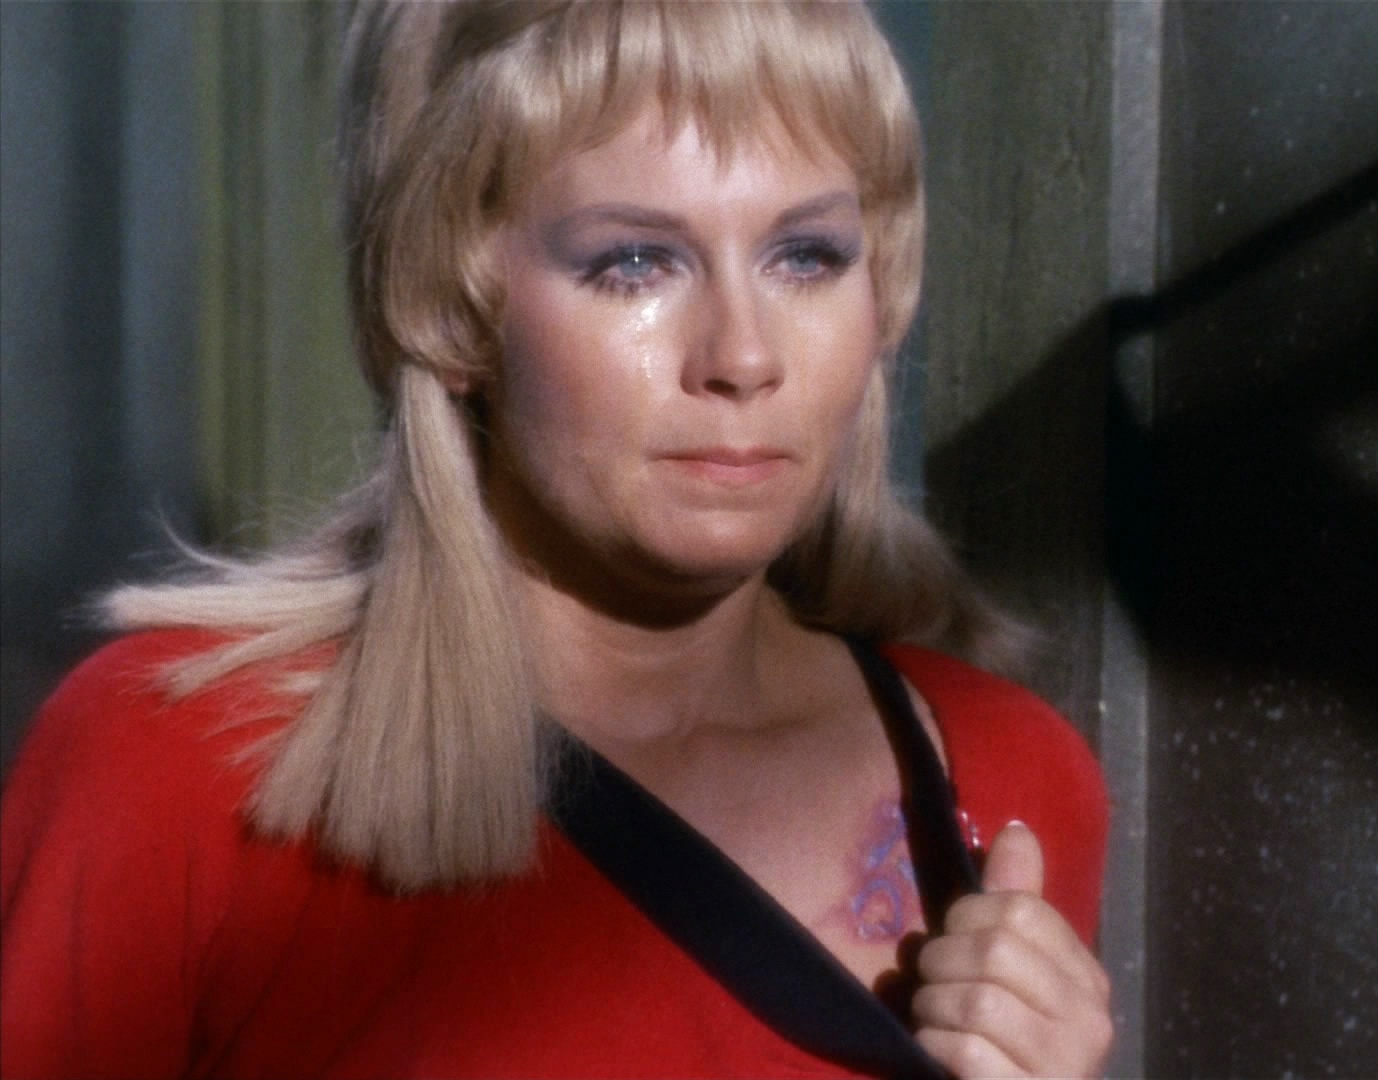 Is it Janice Rand or Christine Chapel?